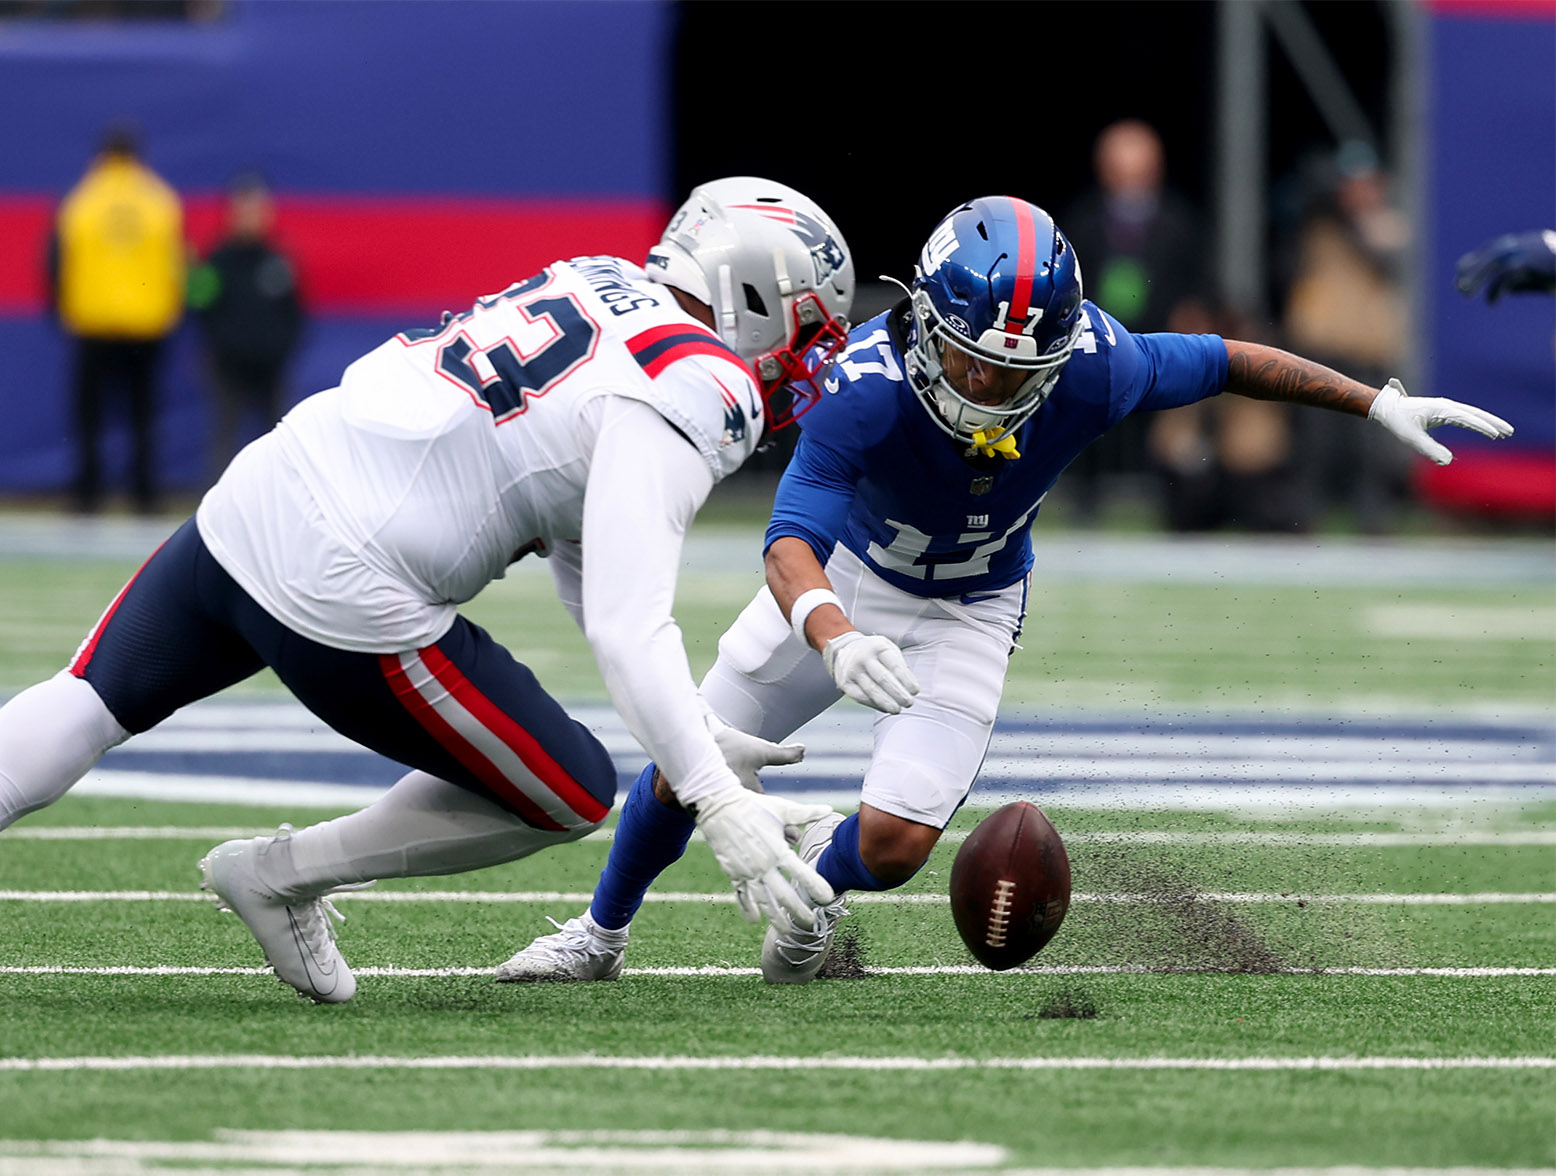 EAST RUTHERFORD, NEW JERSEY - NOVEMBER 26: Anfernee Jennings #33 of the New England Patriots and Wan'Dale Robinson #17 of the New York Giants attempt to recover a fumble during the first quarter at MetLife Stadium on November 26, 2023 in East Rutherford, New Jersey. (Photo by Al Bello/Getty Images)